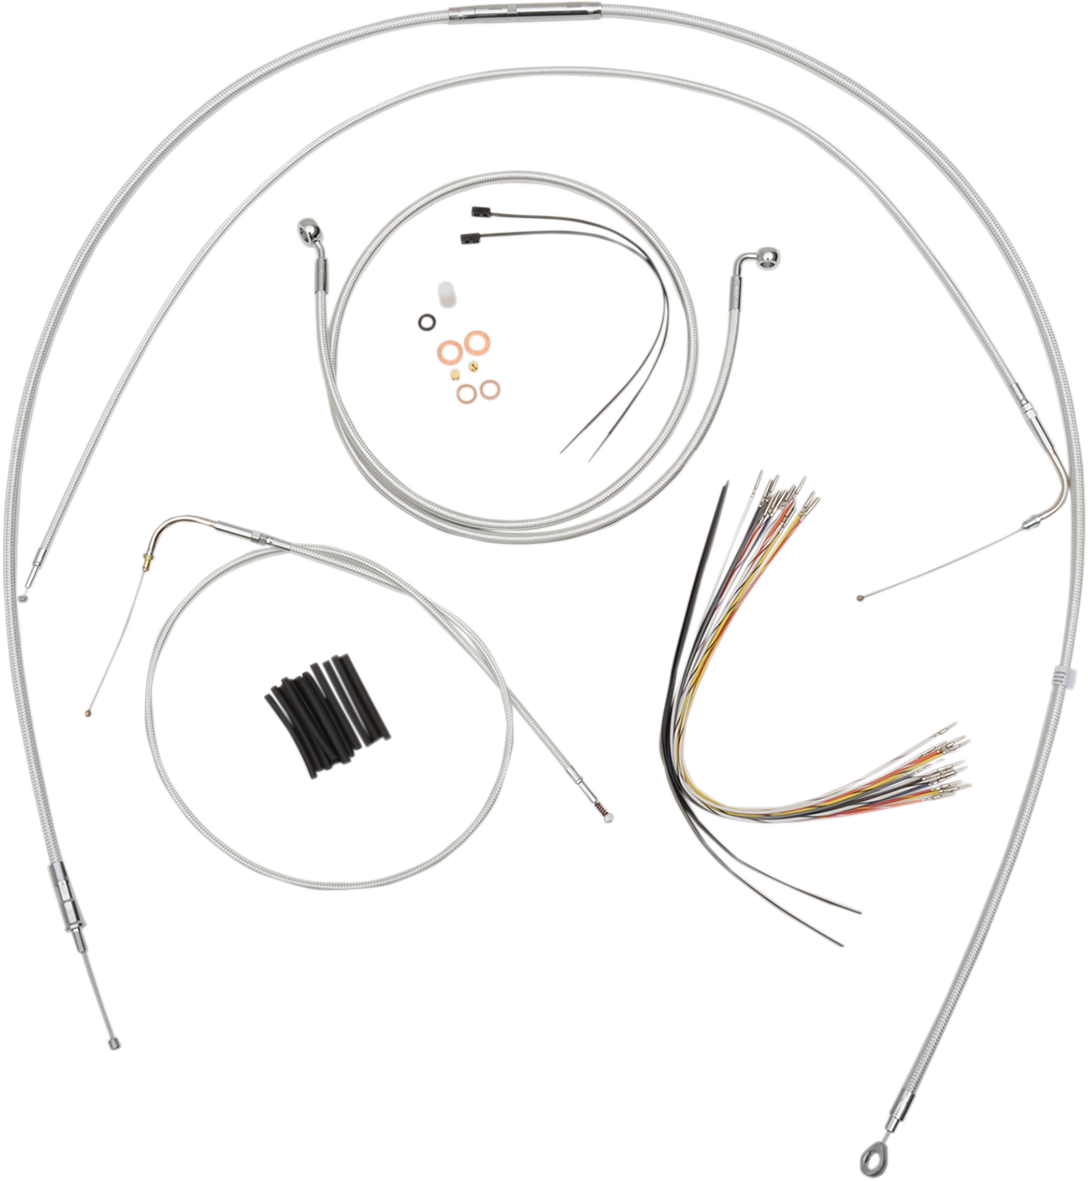 0662-0124 - MAGNUM Sterling Chromite II? Control Cable Kit 387811